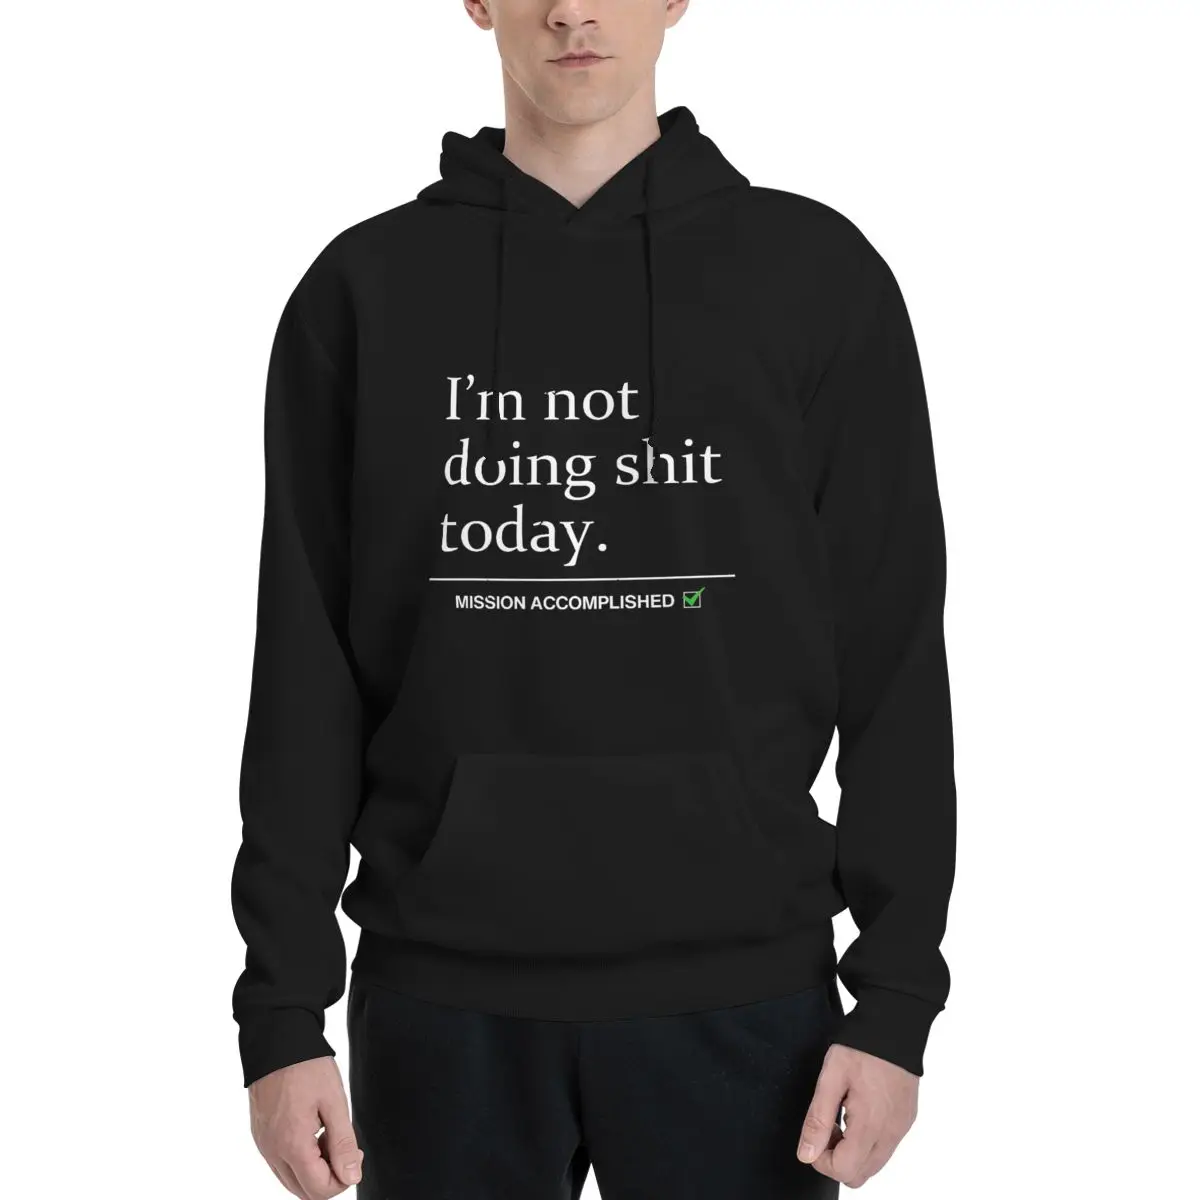 

I'm Not Doing Shit Today, Mission Accomplished Polyester Hoodie Men's Women's Sweater Size XXS-3XL